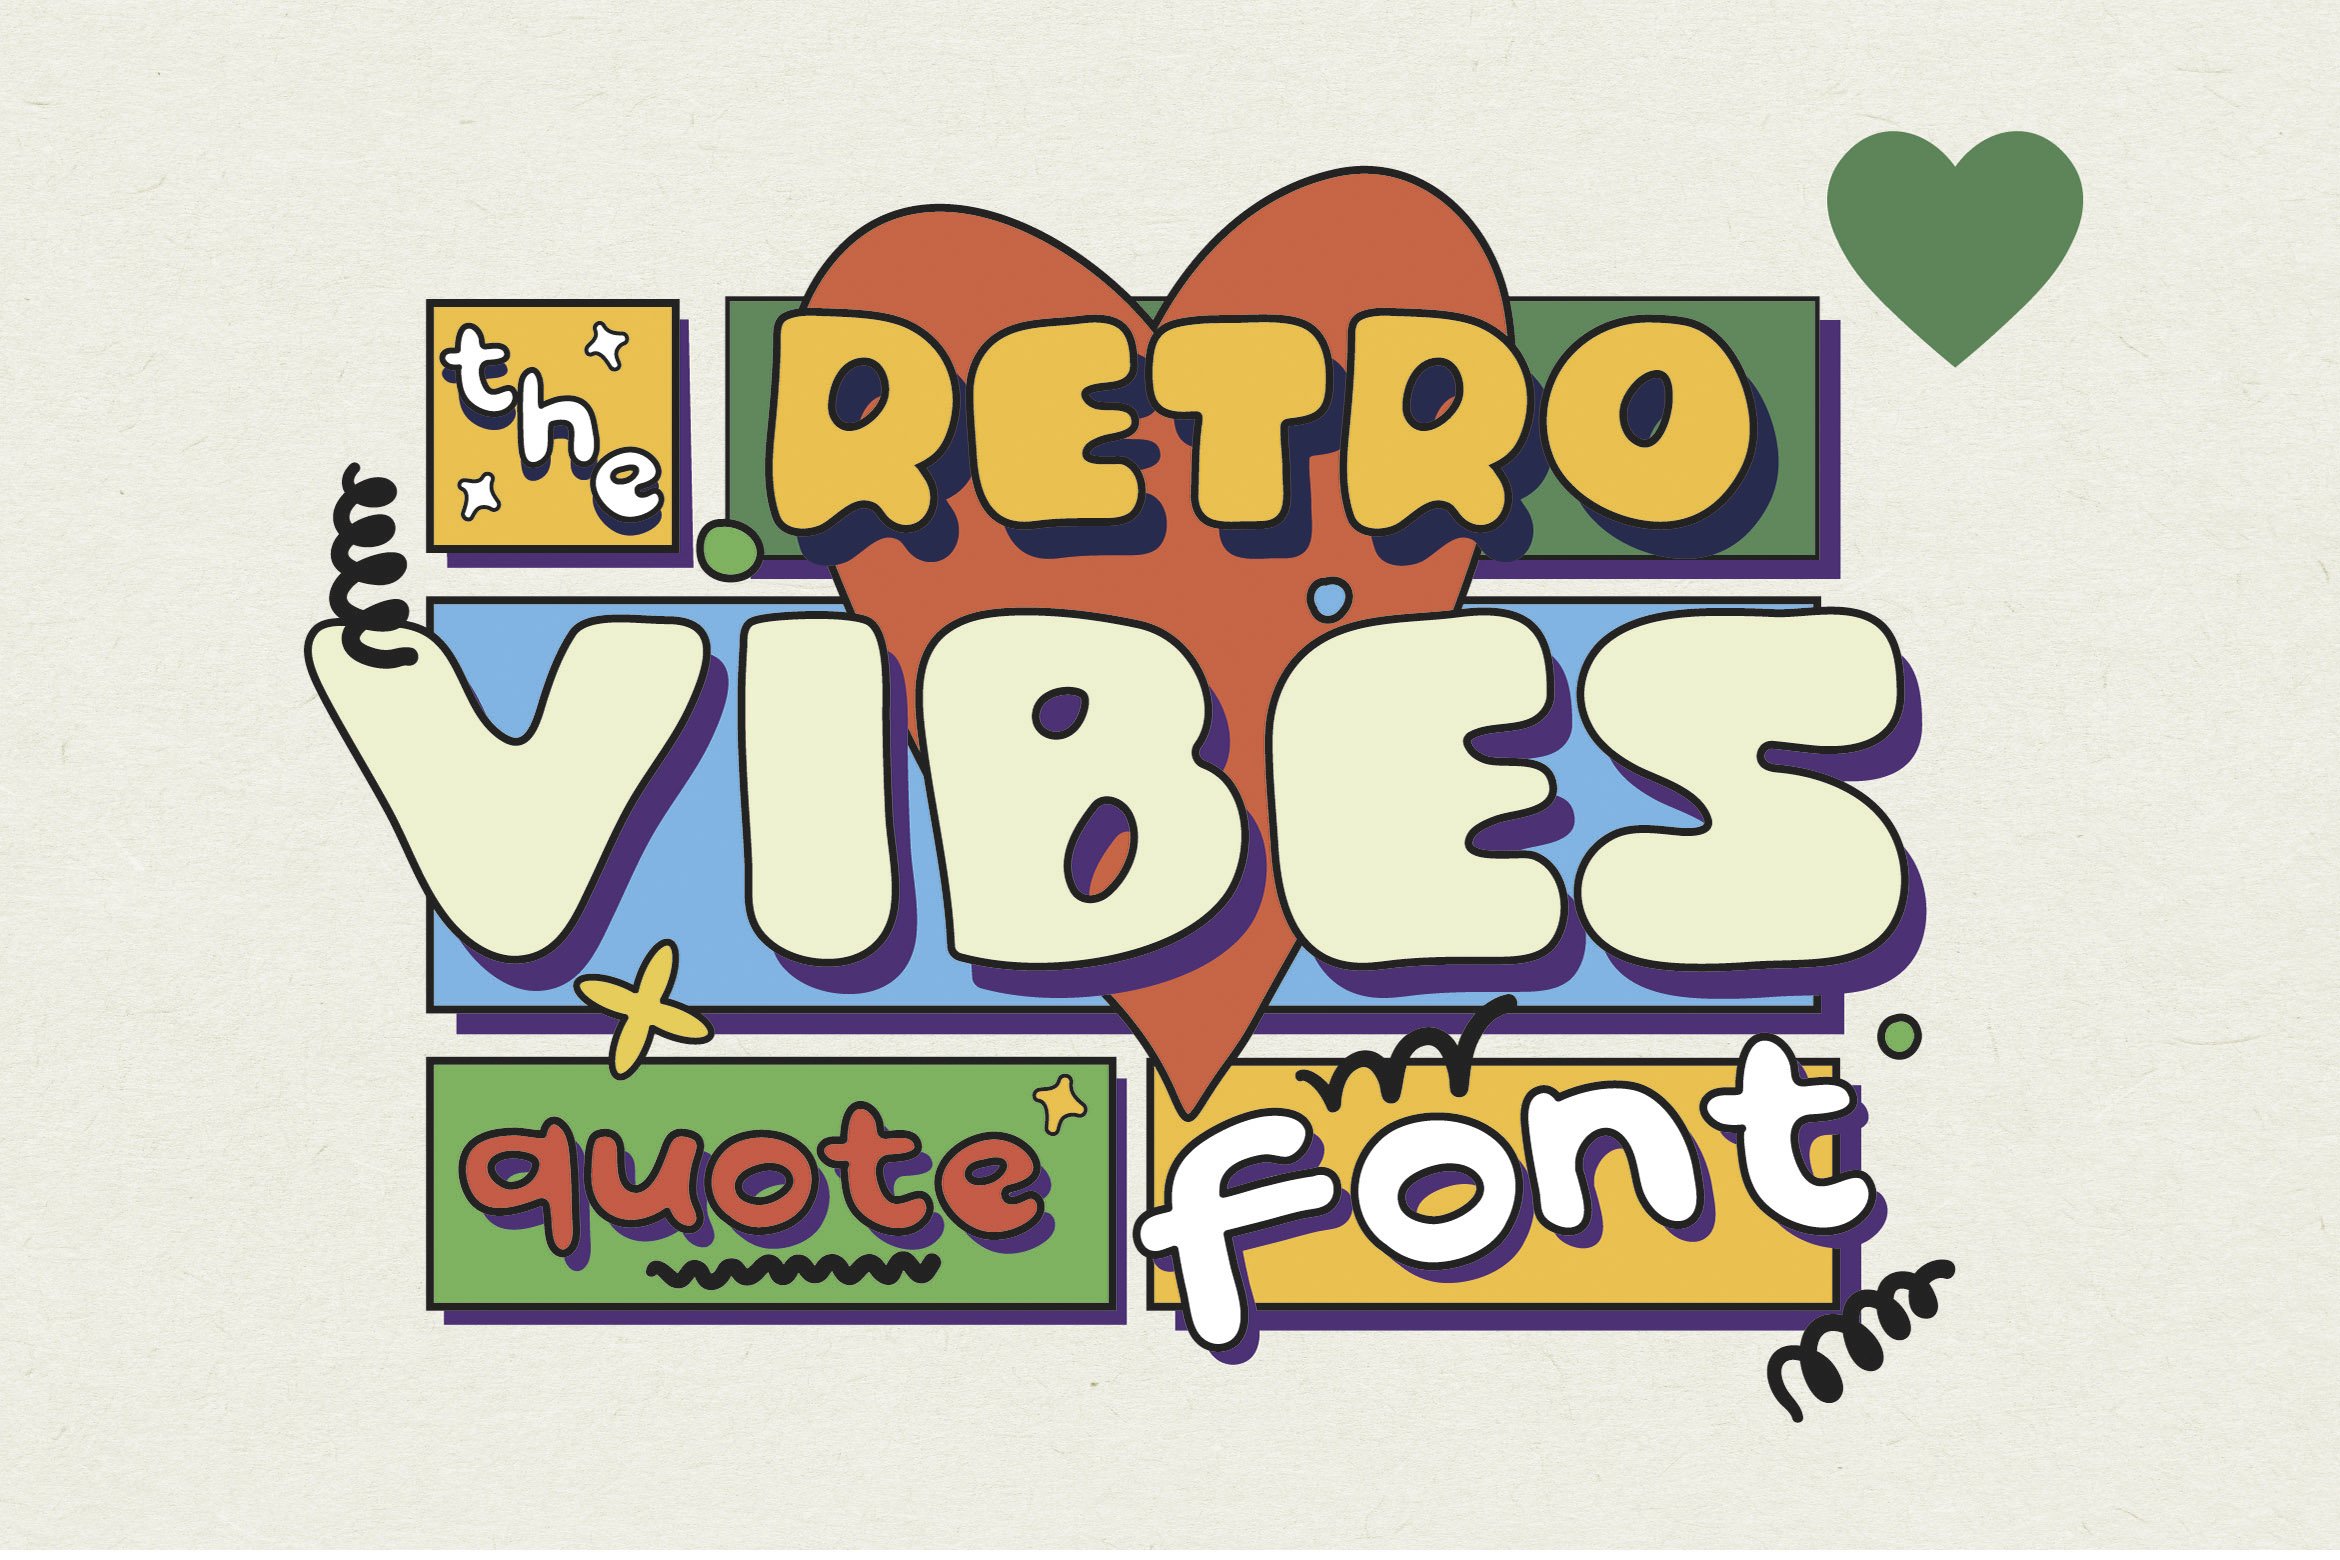 Retro Vibes|Quotable|Hand Drawn Font cover image.